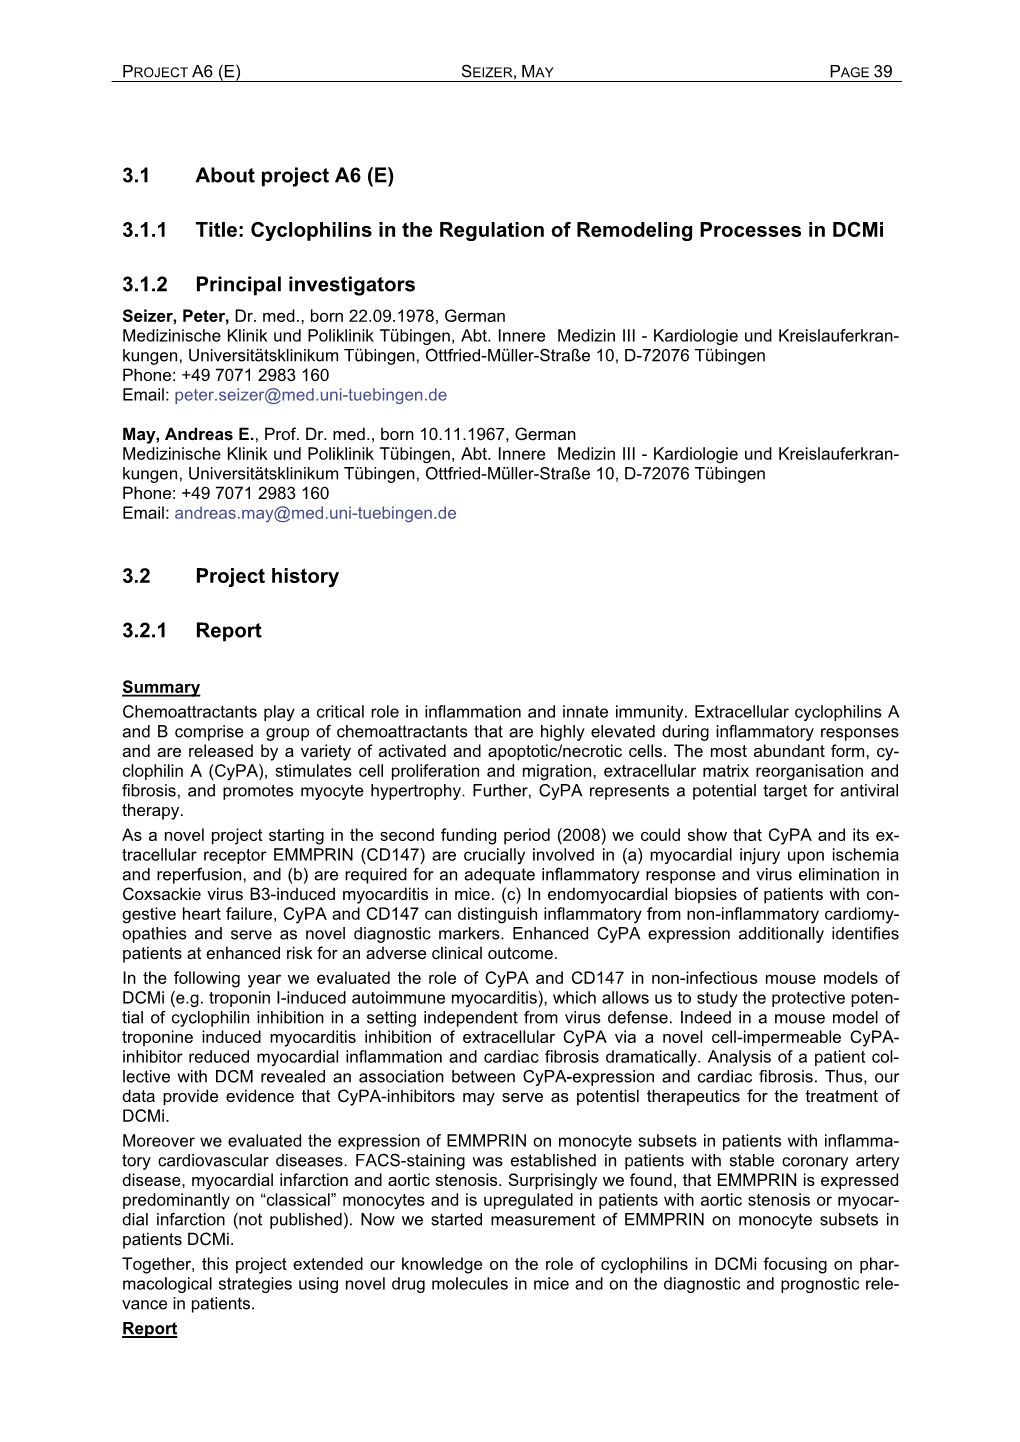 3.1 About Project A6 (E) 3.1.1 Title: Cyclophilins in the Regulation Of